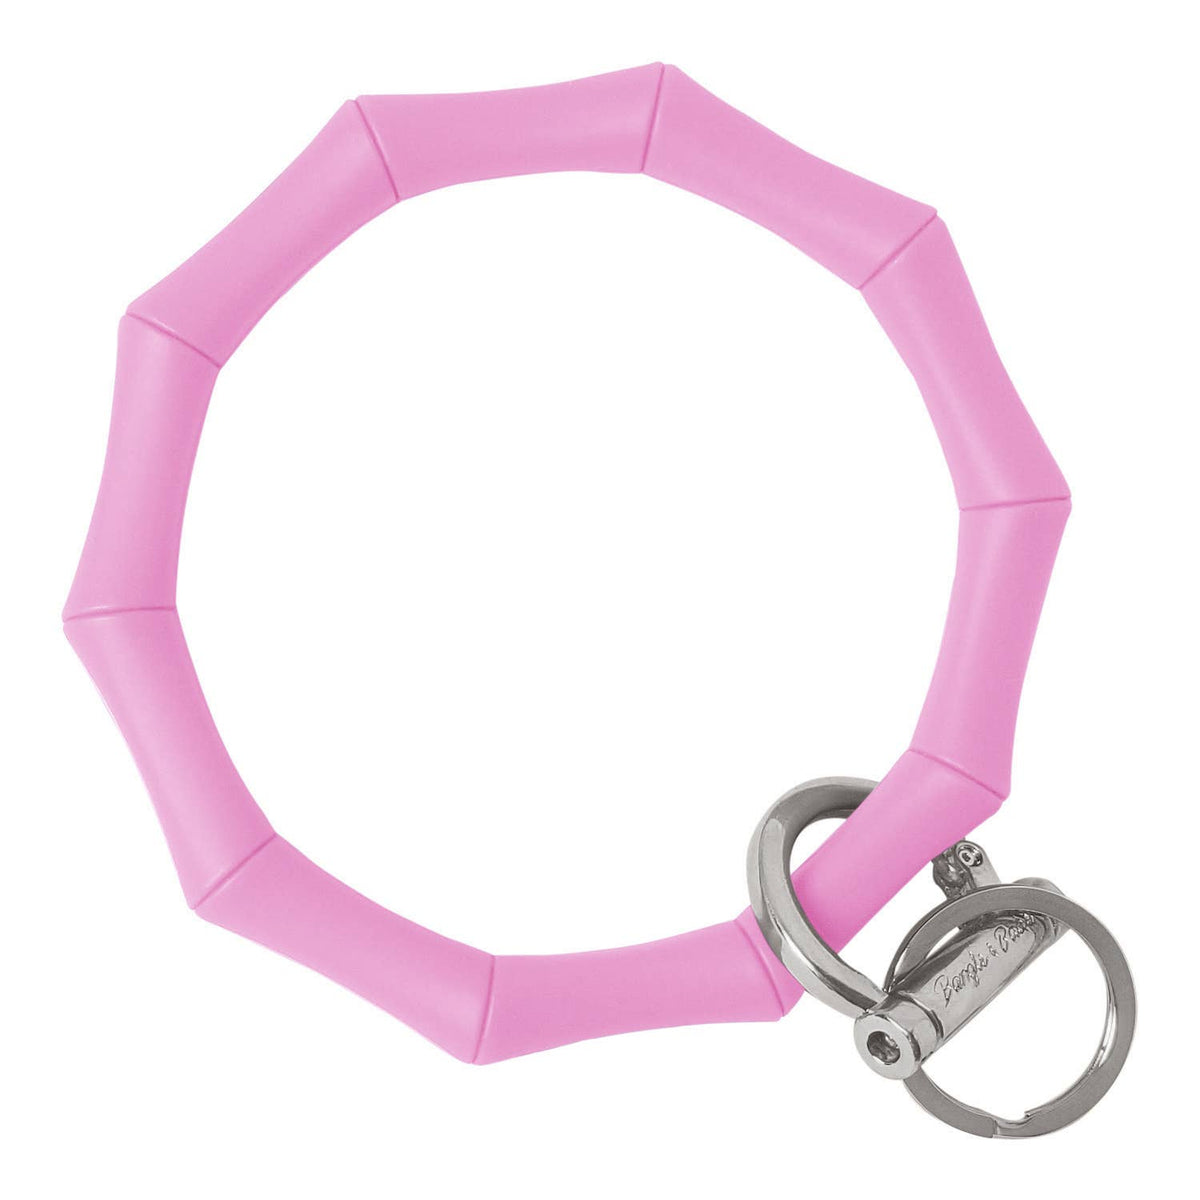 Bamboo Collection Bangle and Babe Bracelet Key Ring- Bright Pink